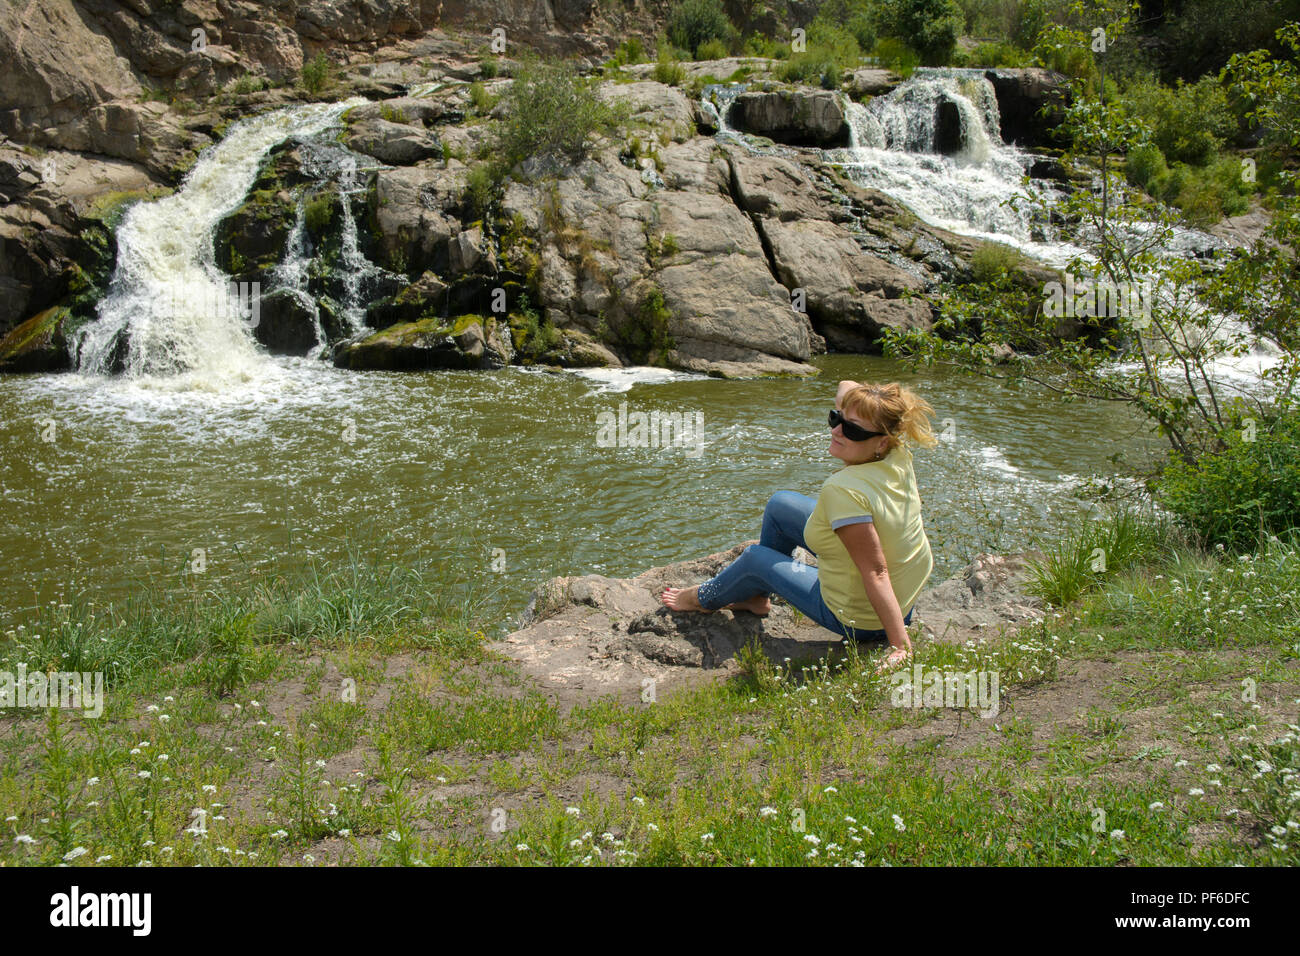 Zhitomir, Ukraine - July 16, 2018. The waterfall on the river flows through  and over the rocks covered with lichen and moss against a background of gr  Stock Photo - Alamy